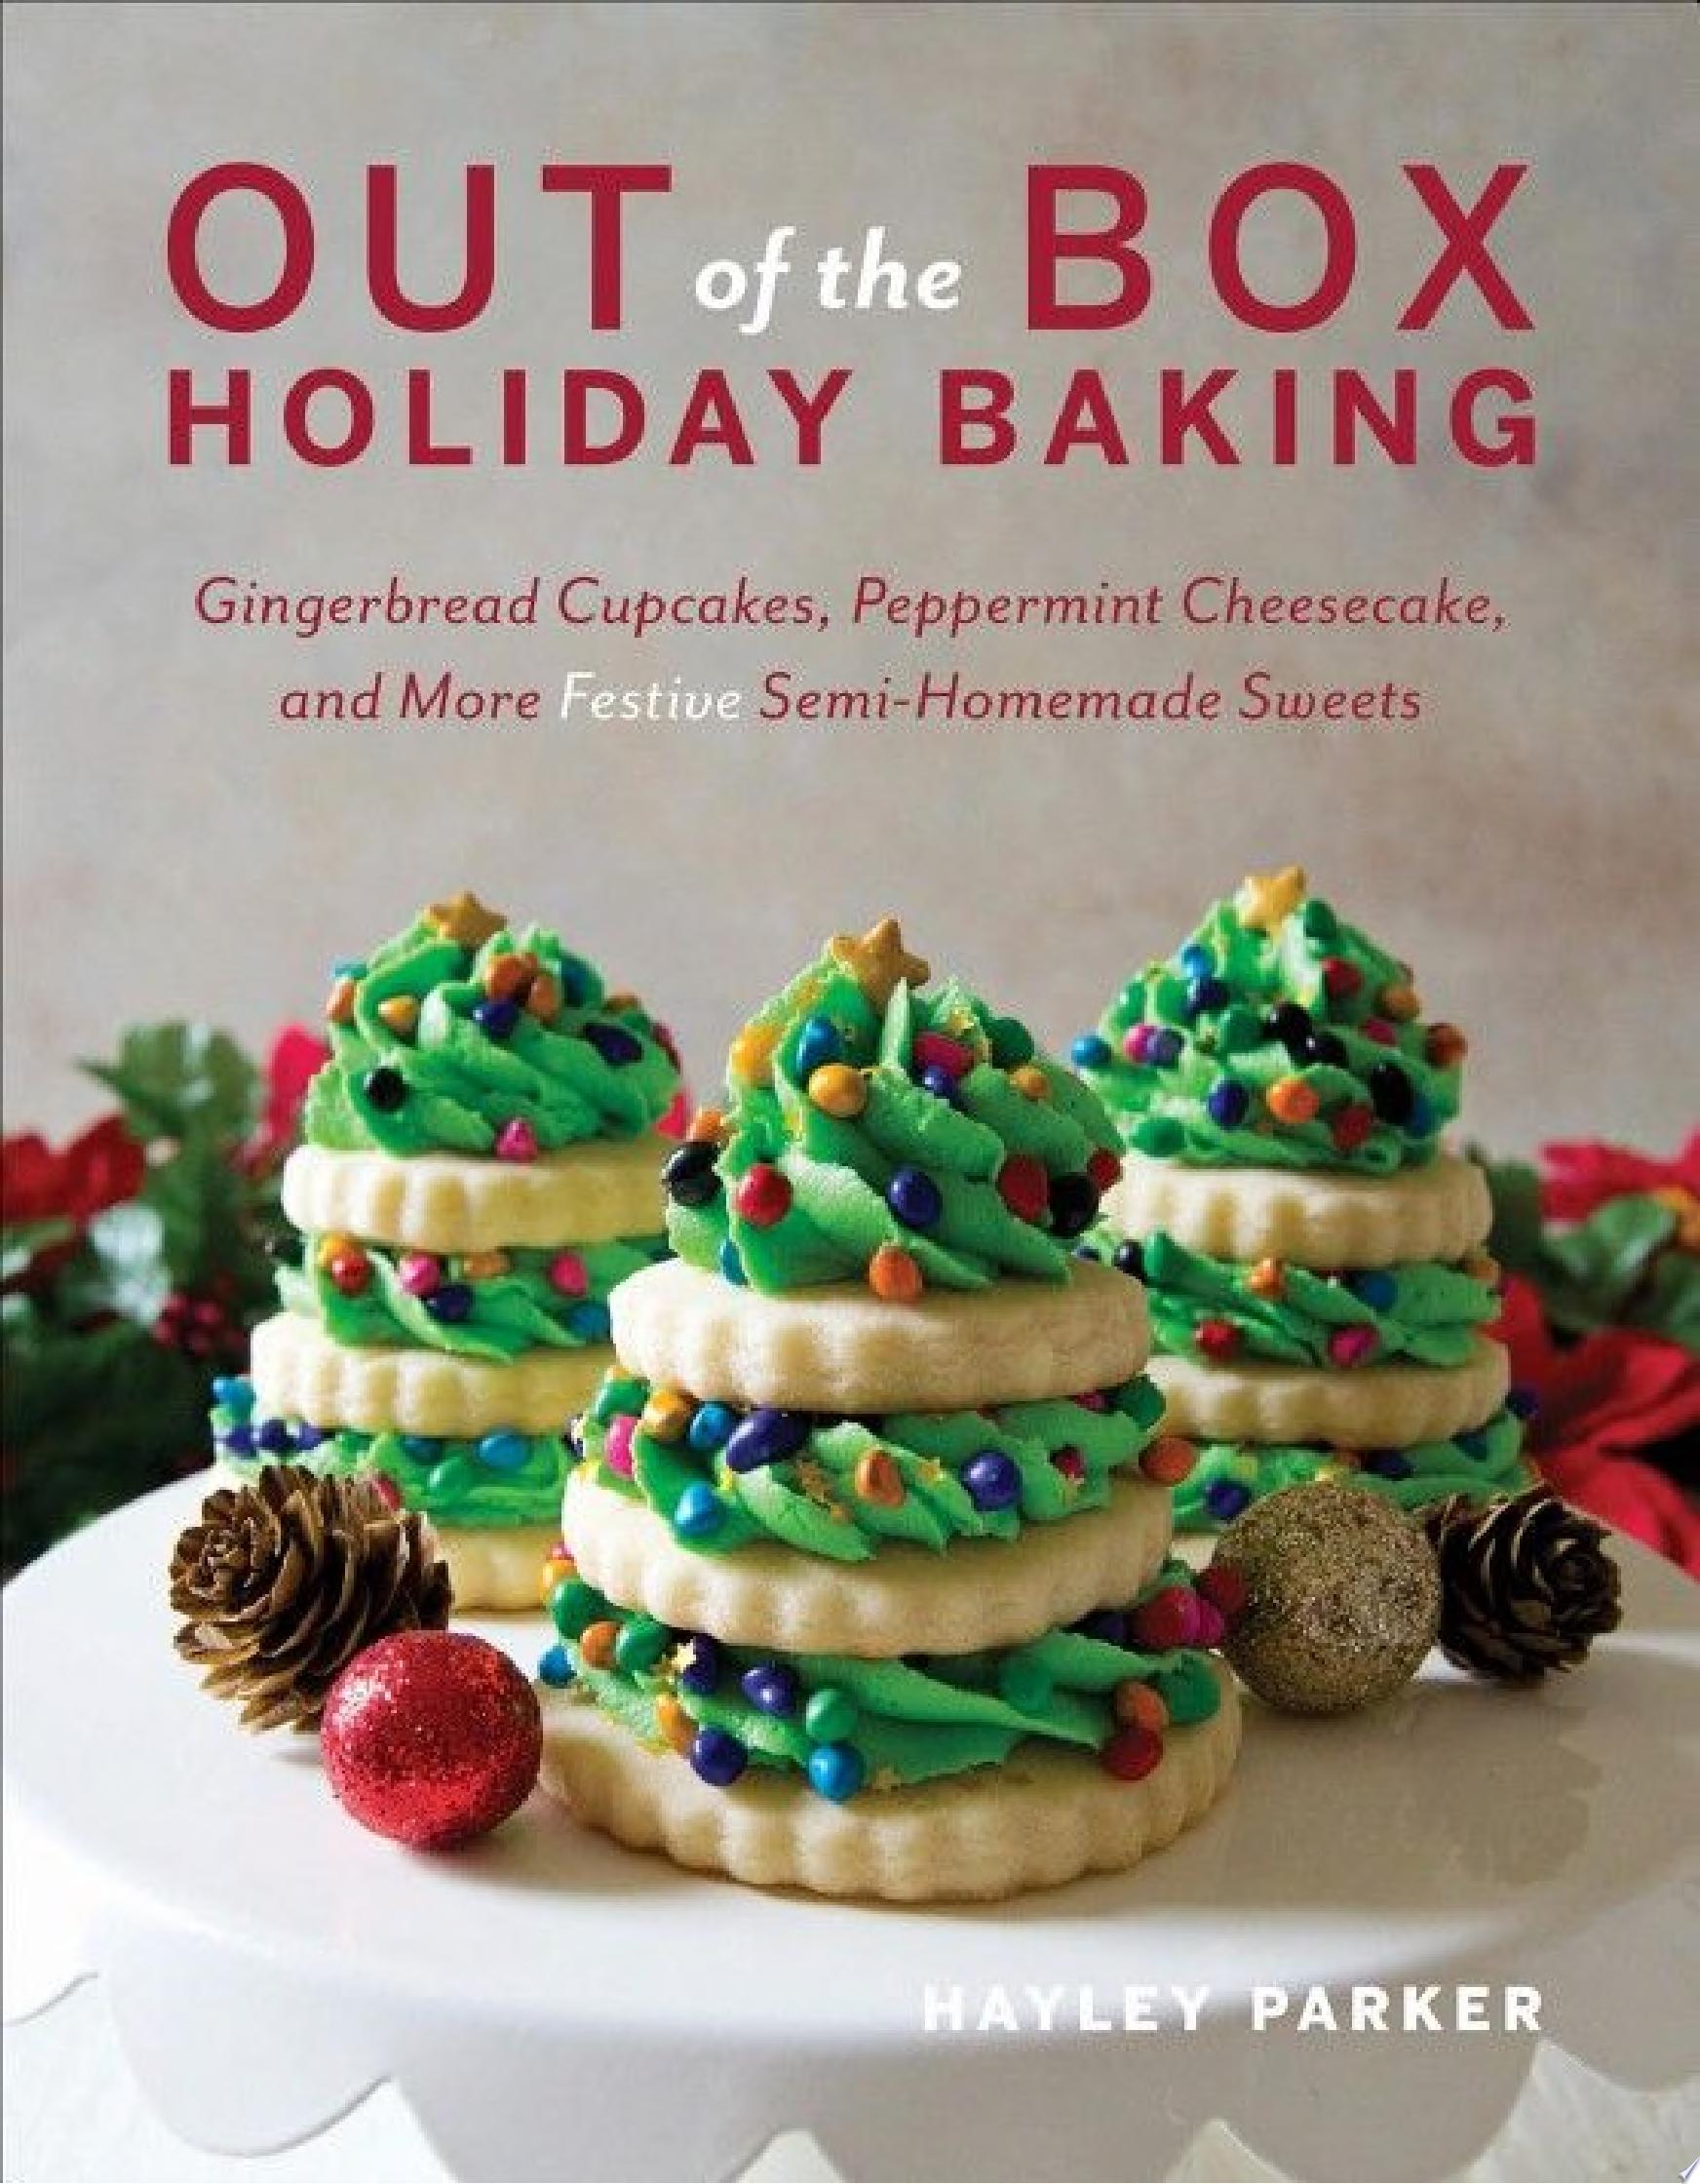 Image for "Out of the Box Holiday Baking: Gingerbread Cupcakes, Peppermint Cheesecake, and More Festive Semi-Homemade Sweets"